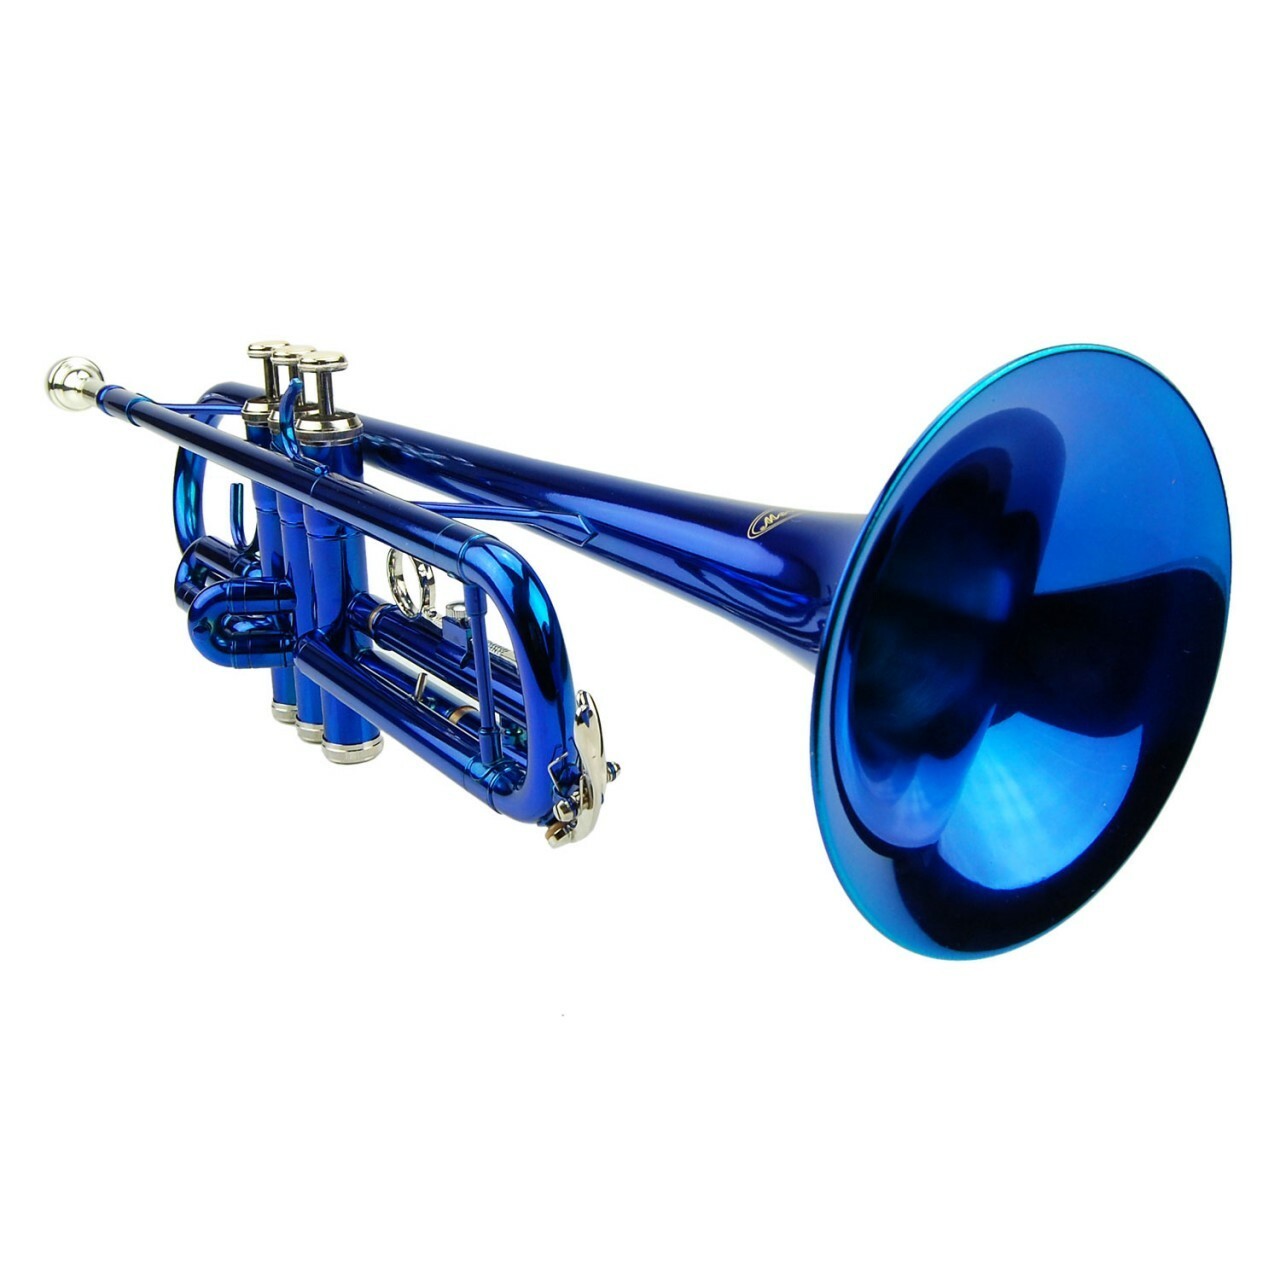 Student Bb Standard Trumpet with Case - Blue - $159.99